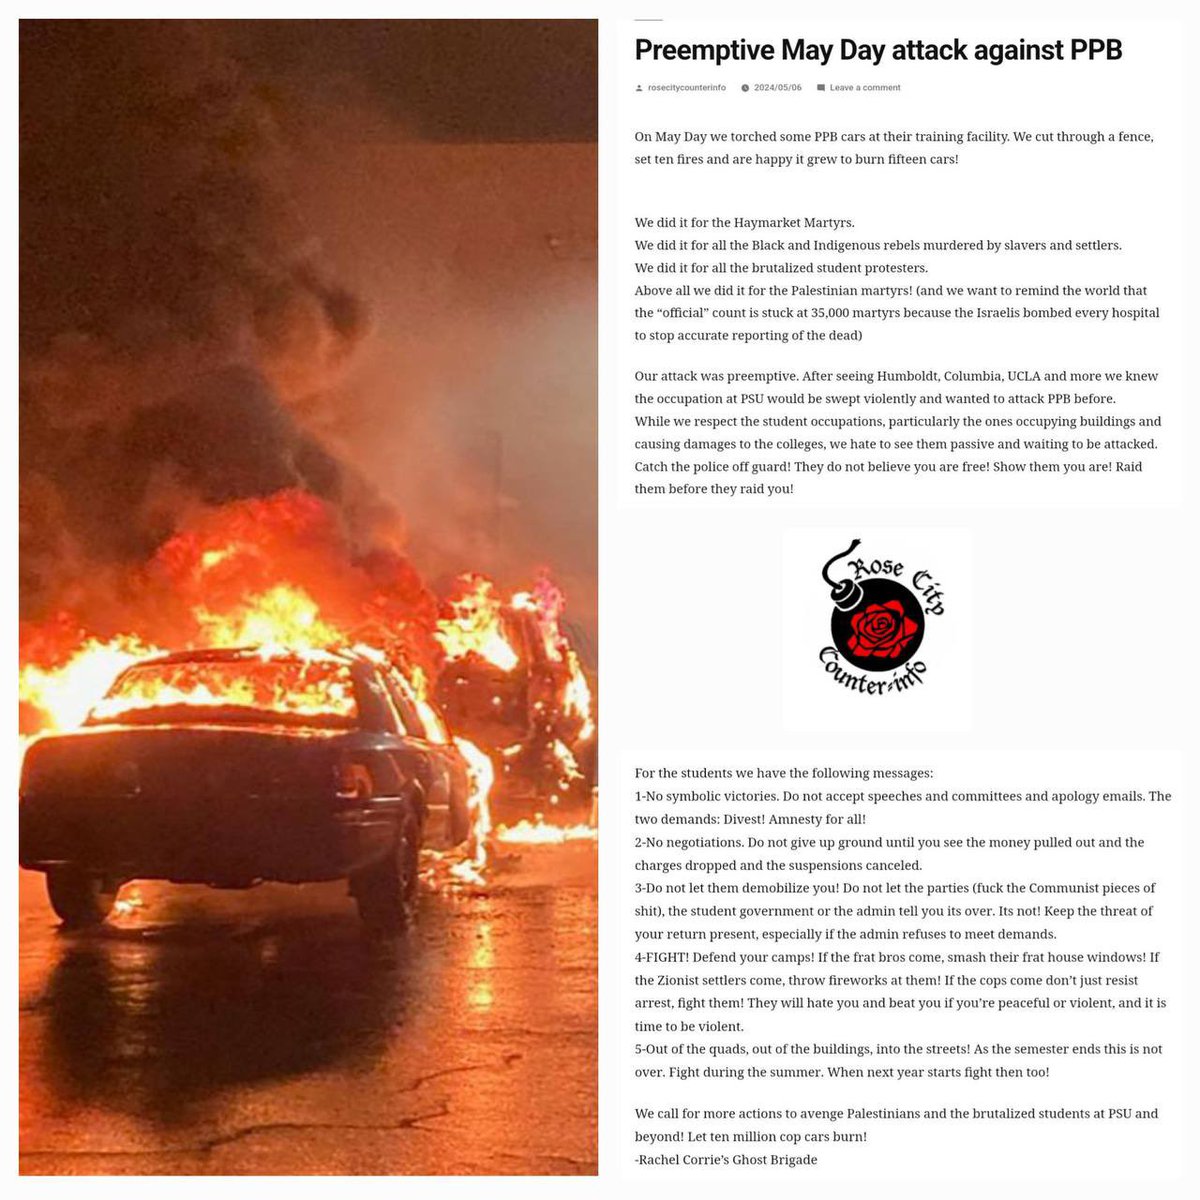 A Domestic Terrorist Organization in Portland, Oregon going by “Rachel Corrie’s Ghost Brigade” released a Statement today in which they claimed Responsibility for the Torching of 15 Vehicles belonging to the Portland Police Department on May 1st, in what they claim was a